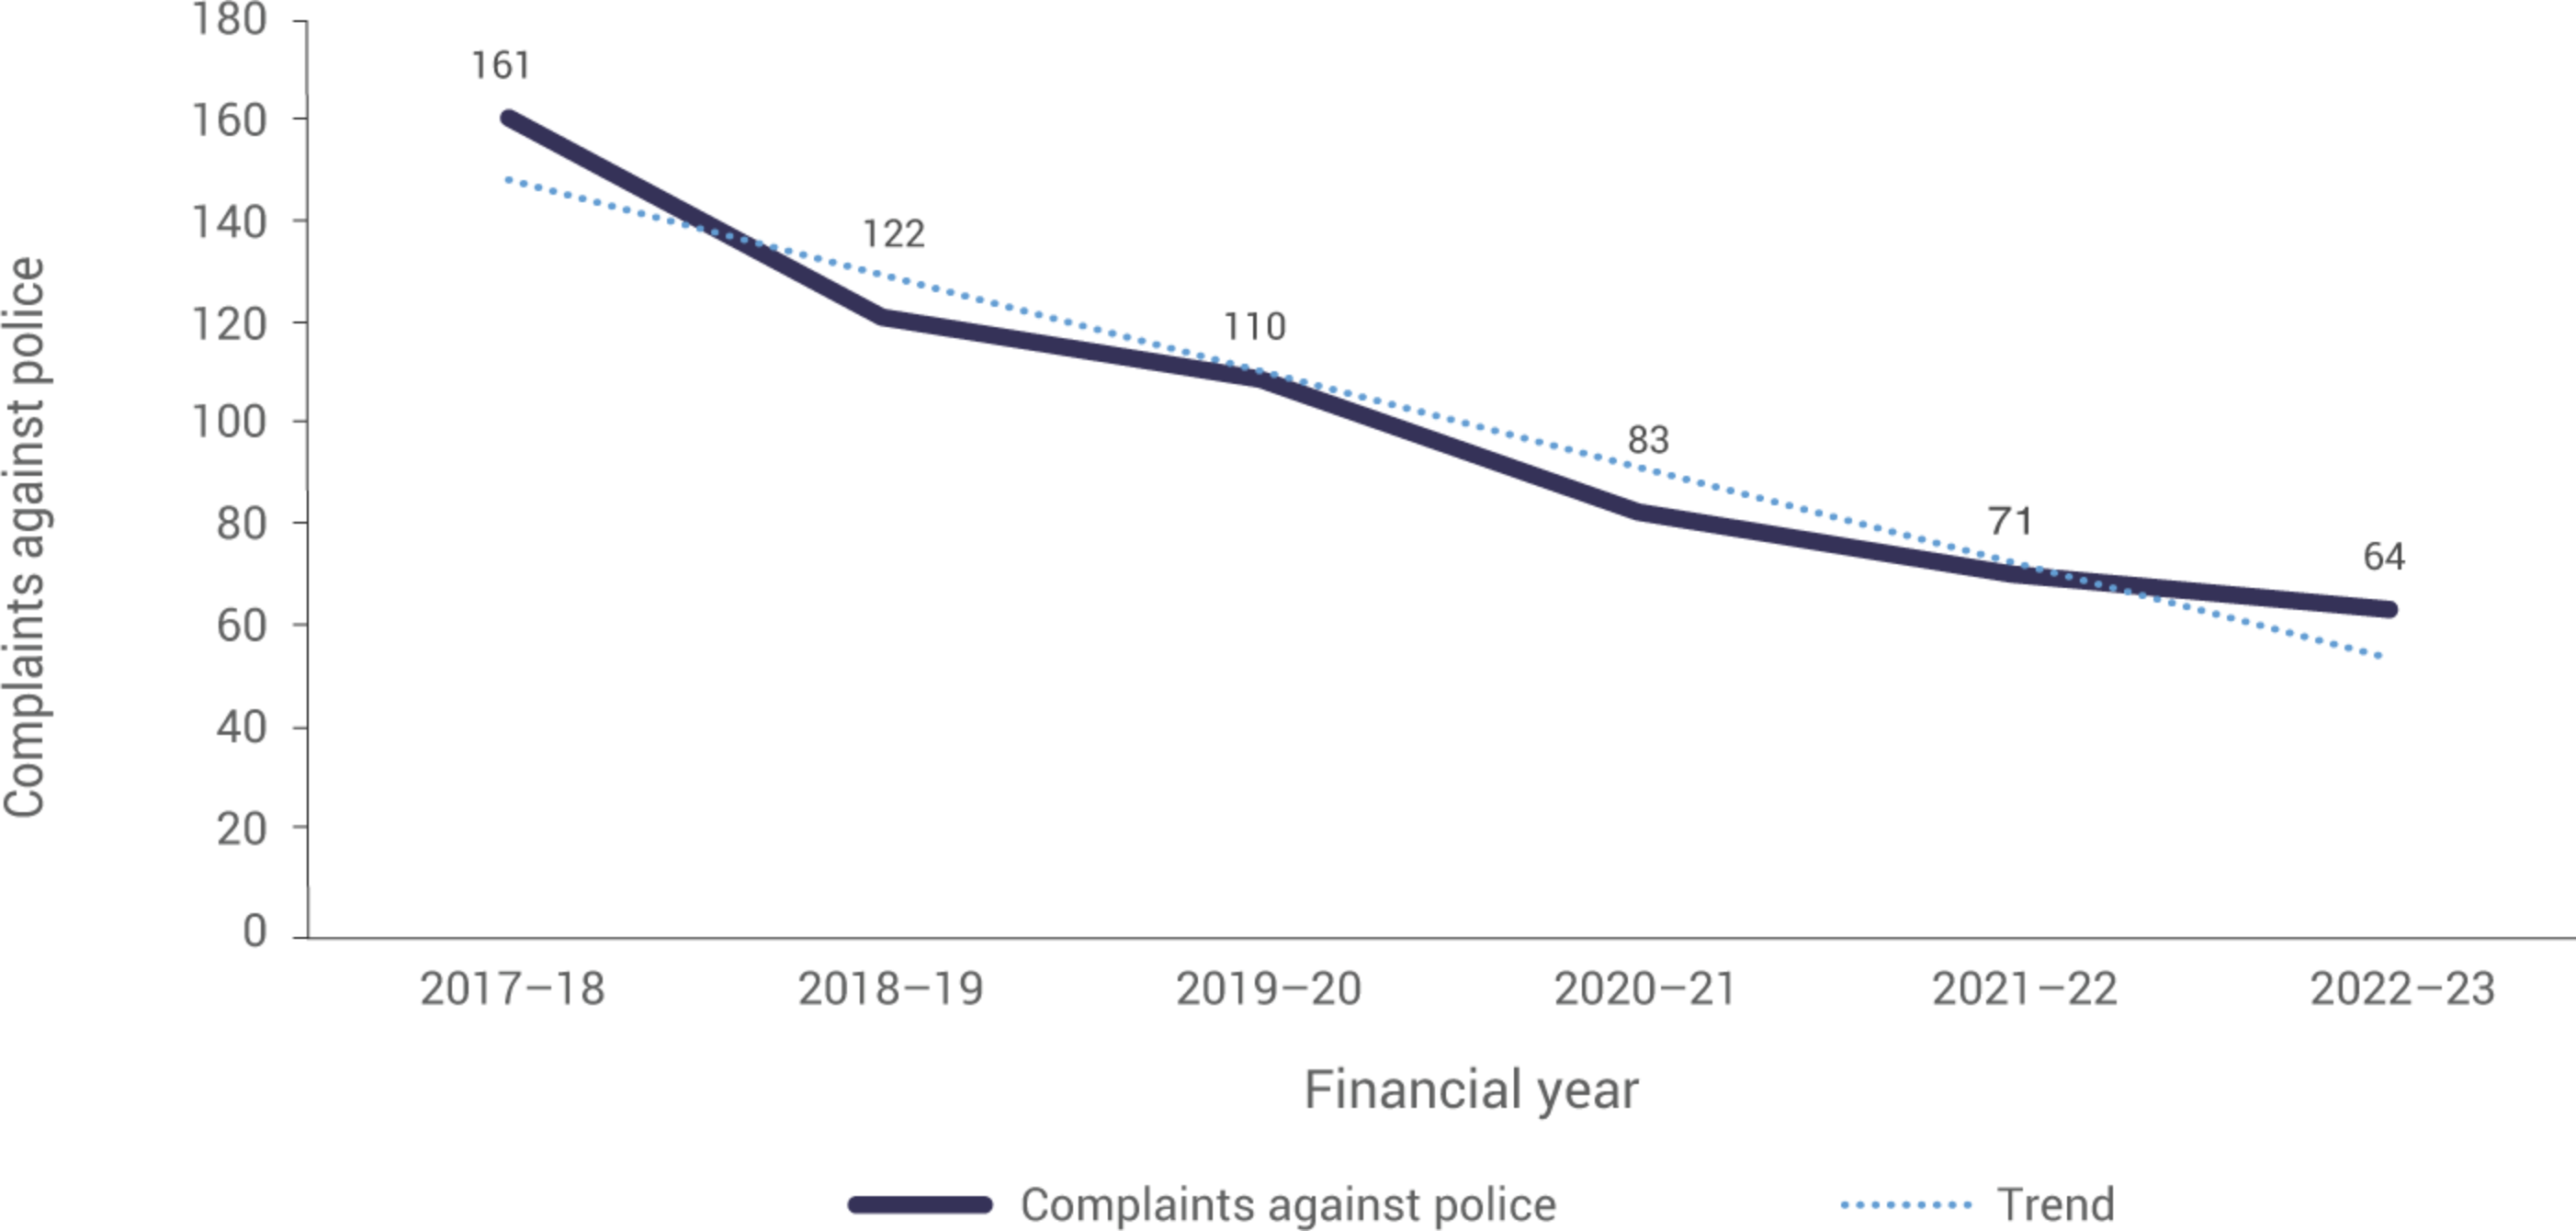 This Figure is a line graph depicting the number of complaints against police over a six-year period, from the 2017-18 financial year to the 2022-23 financial year.